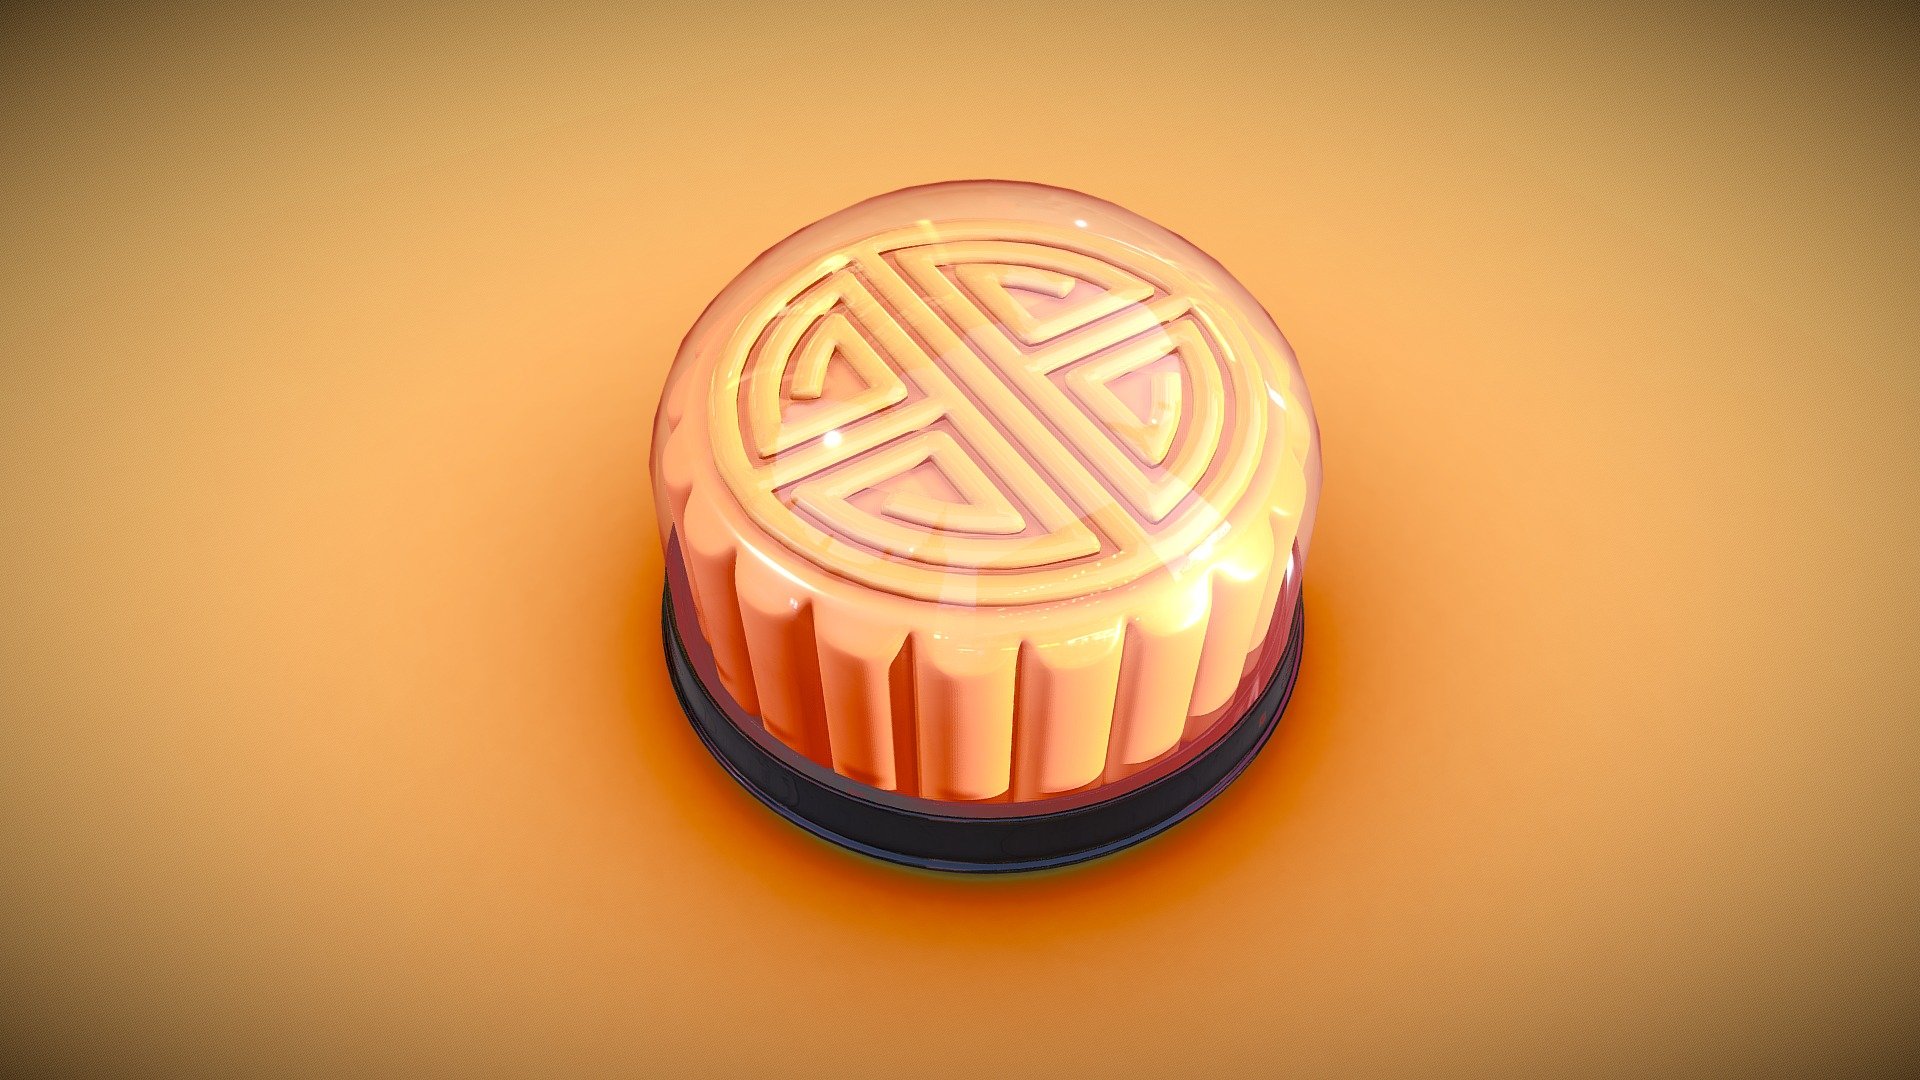 Sketchfab 3December 2020 Challenge!!!

12th DAY-CAKE

Hello guys, I made a simple CHINESE CAKE (MOONCAKE), made with 3dsmax.

Hope you like it 3d model